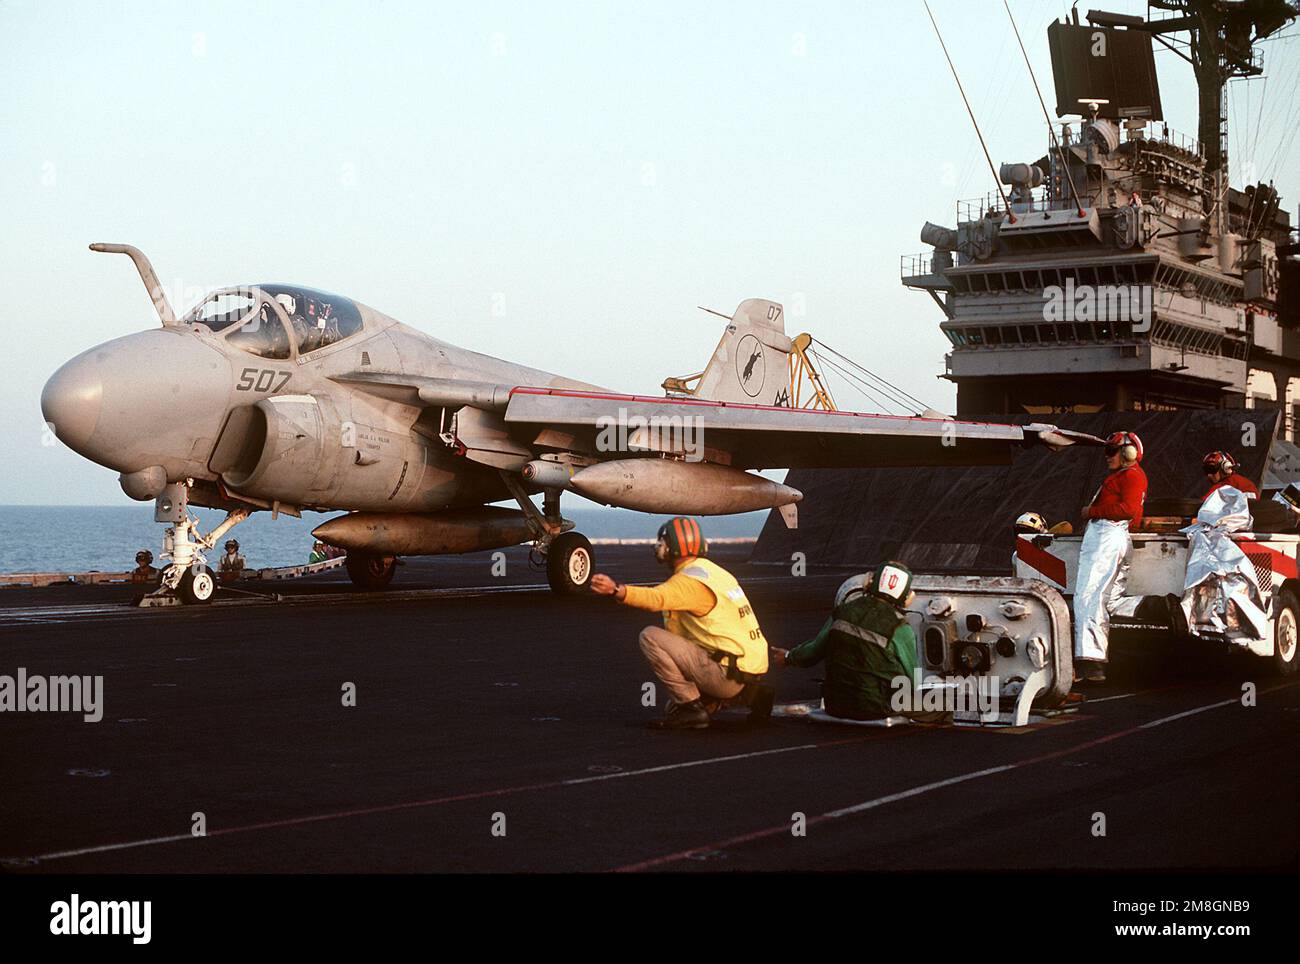 The catapult officer gives the launch signal to the pilot of an Attack Squadron 35 (VA-35) A-6E Intruder aircraft on the starboard catapult of the aircraft carrier USS SARATOGA (CV-60). An AGM-65E Maverick missile is mounted on the port, inboard wing pylon. Base: USS Saratoga (CV 60) Country: Mediterranean Sea (MED) Stock Photo